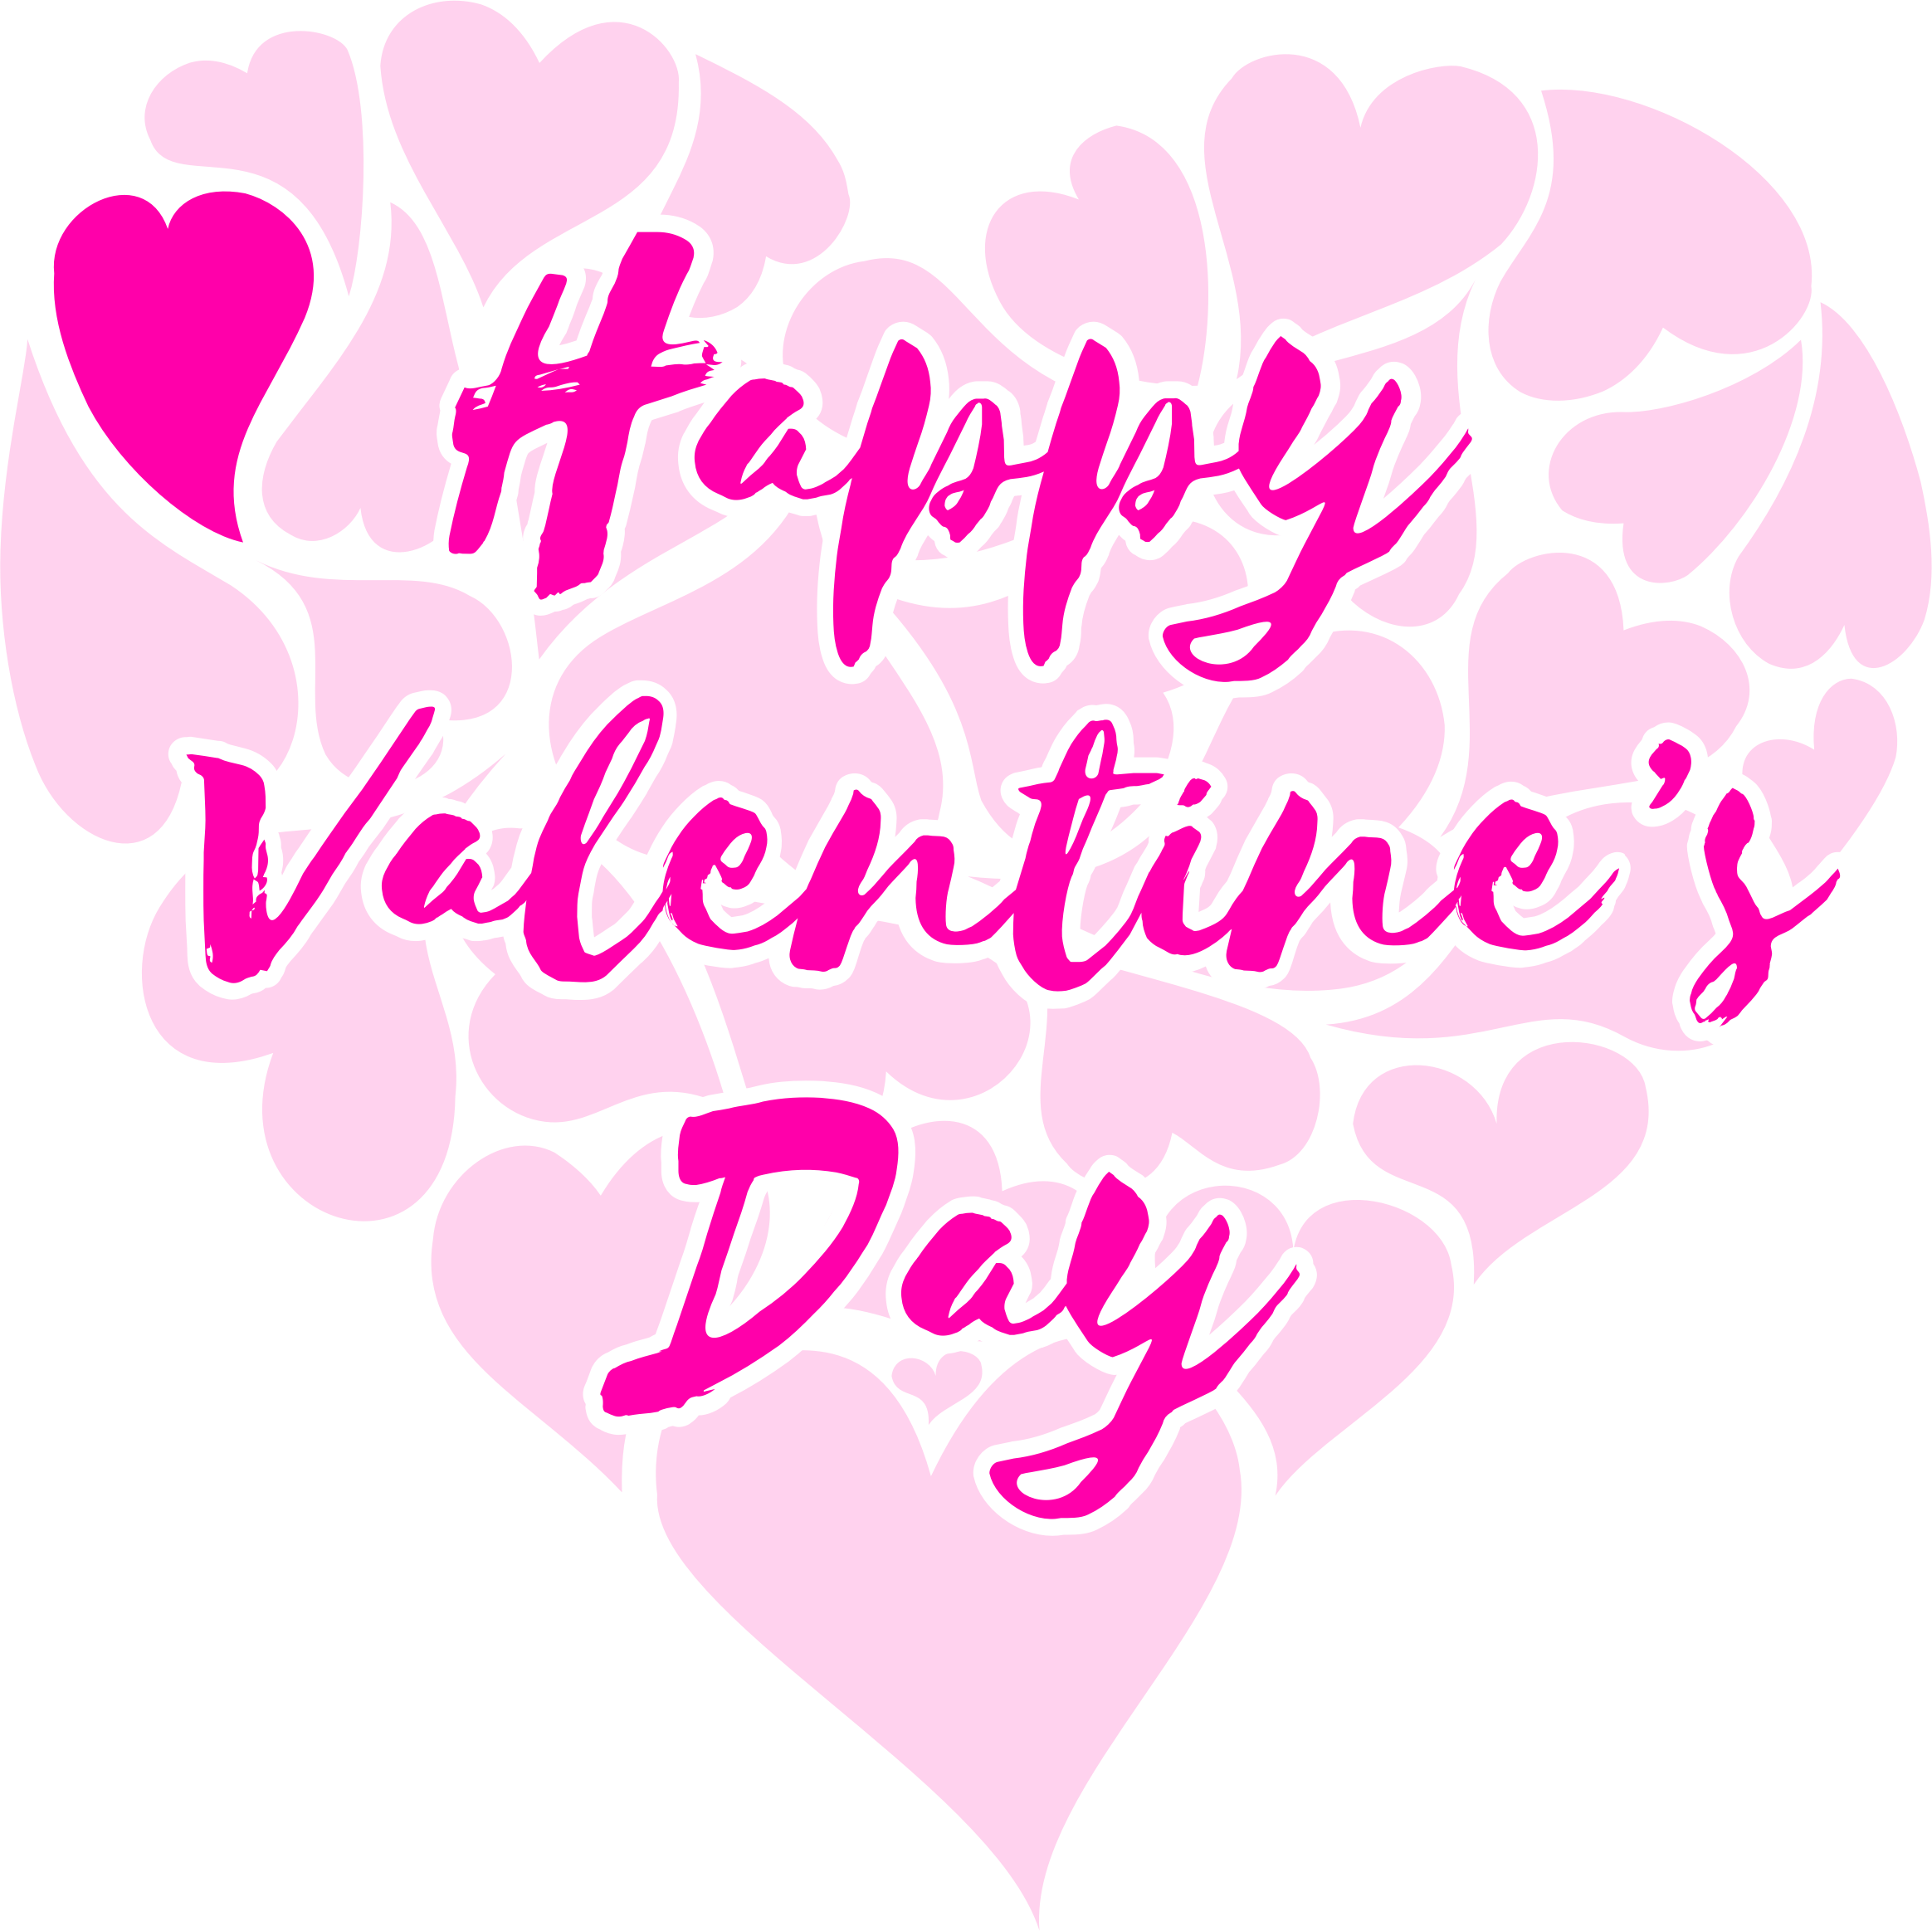 february clipart title